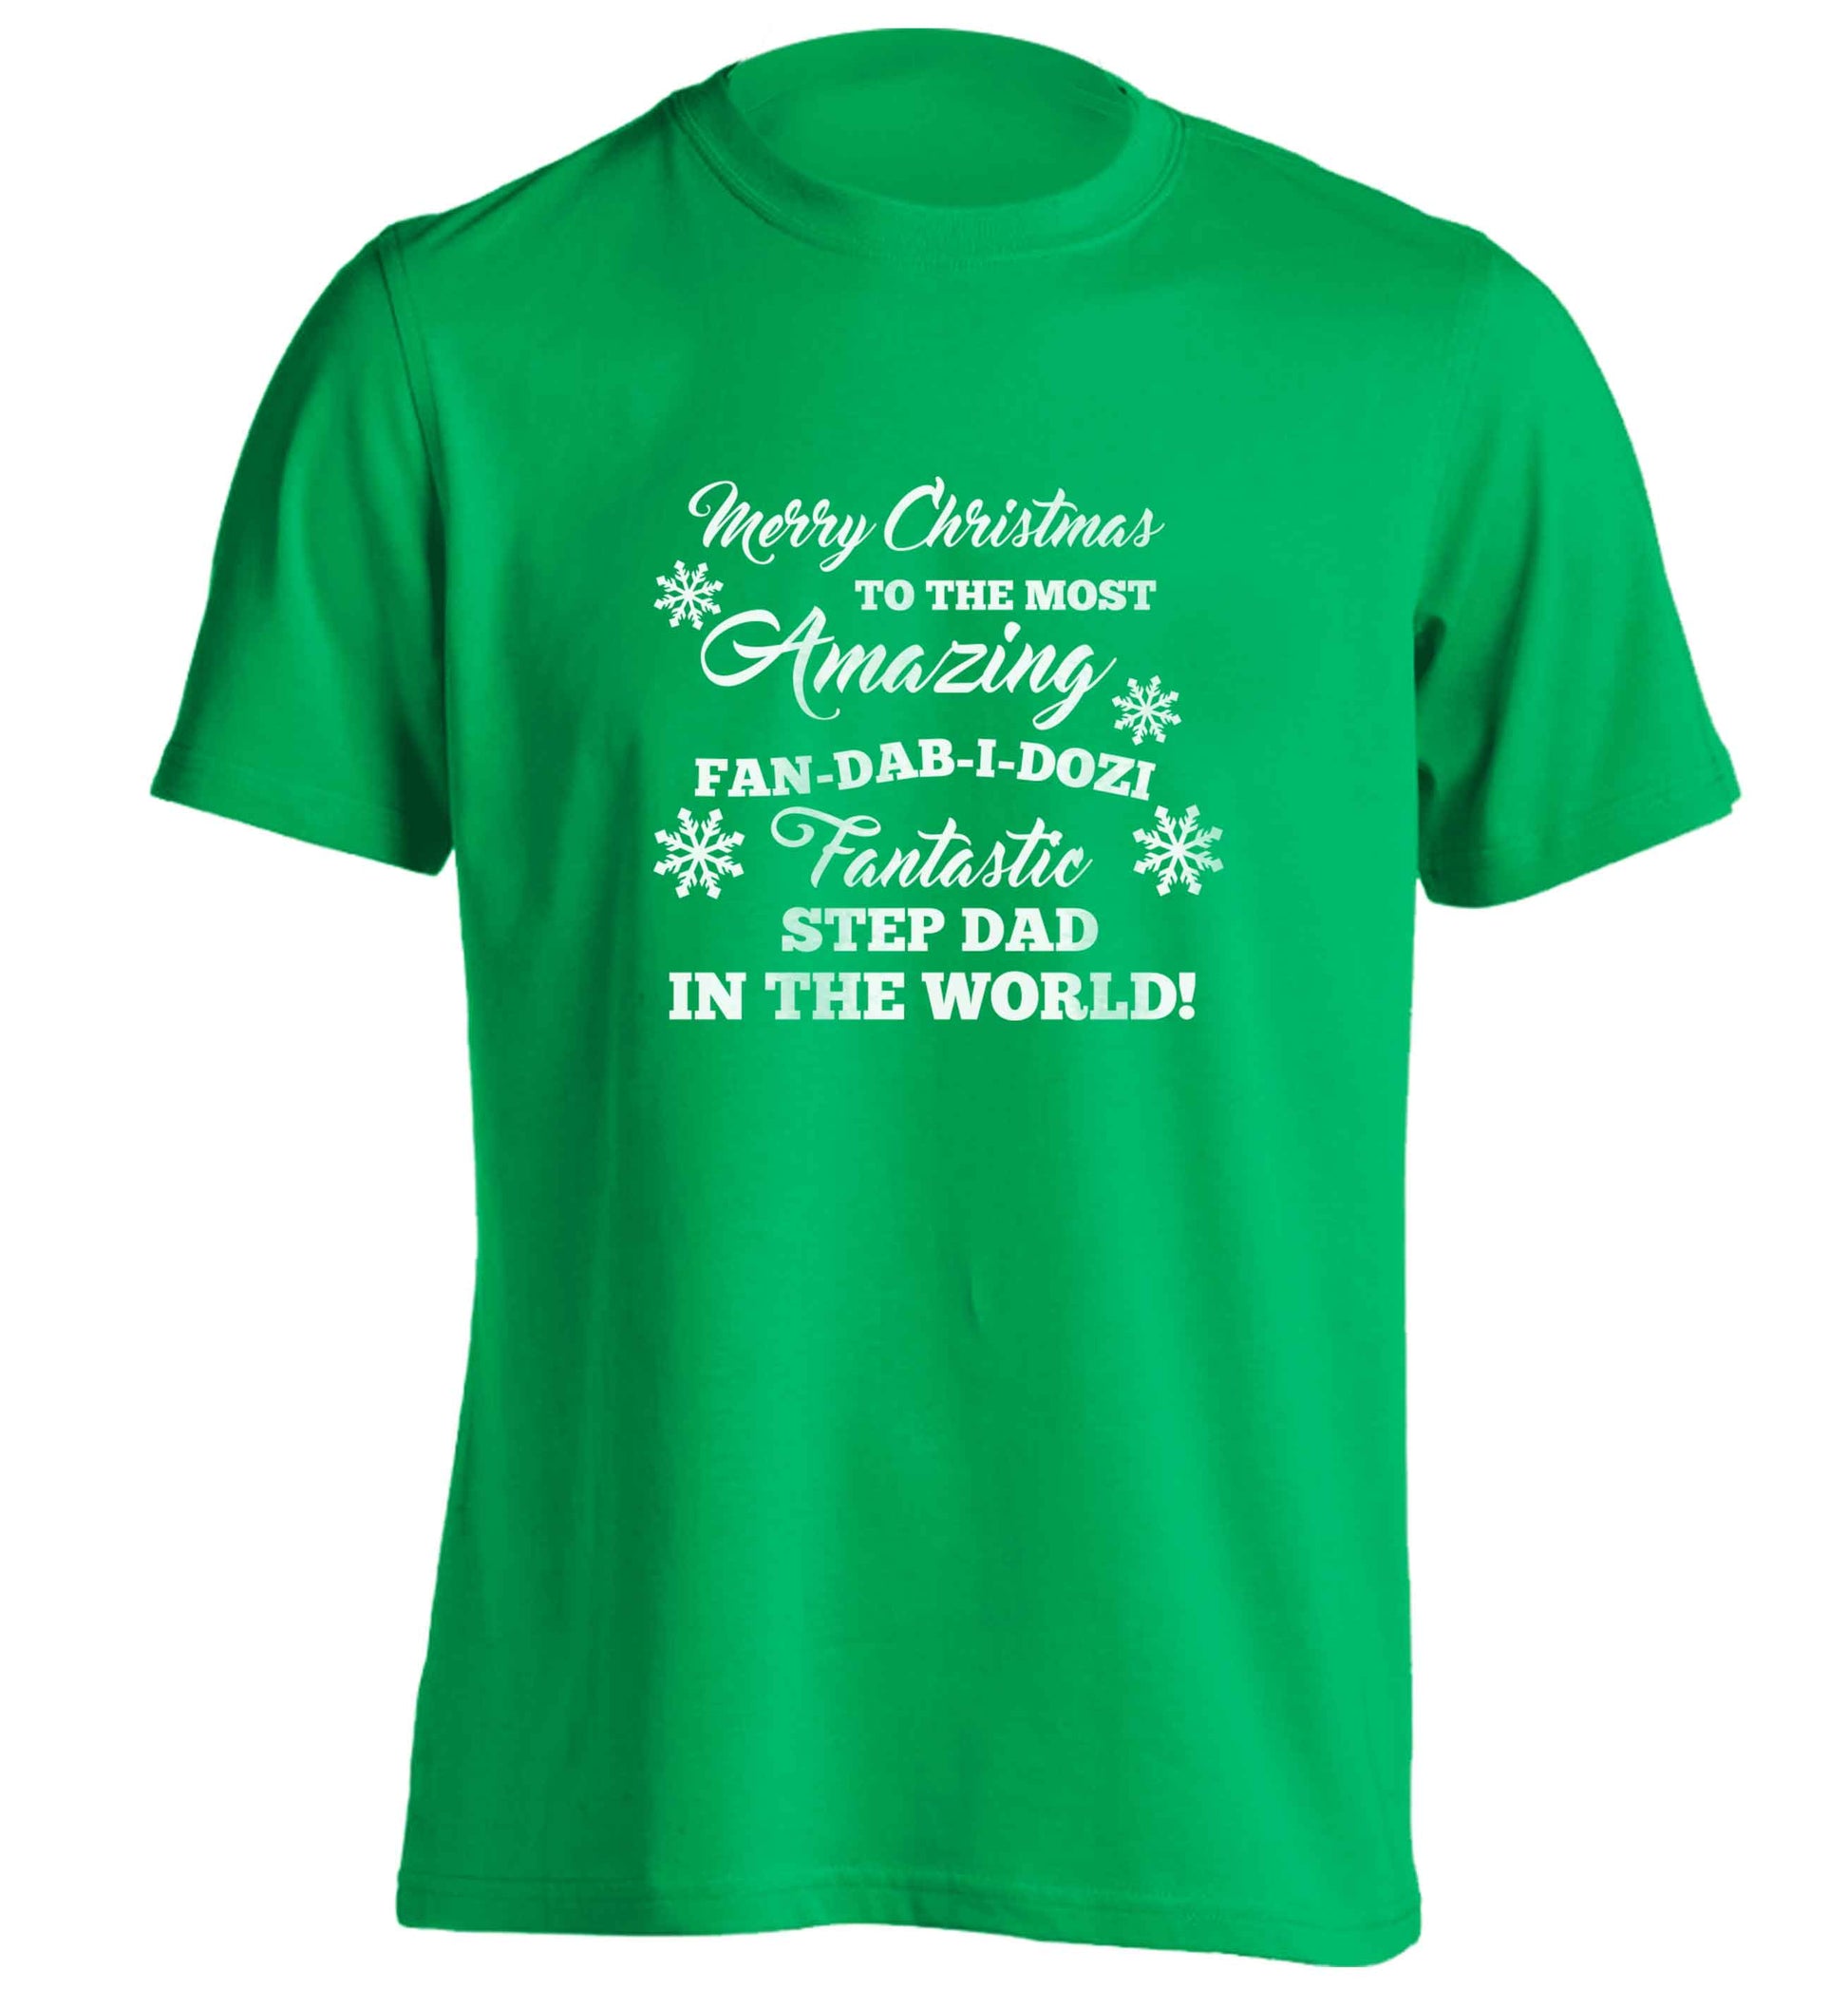 Merry Christmas to the most amazing fan-dab-i-dozi fantasic Step Dad in the world adults unisex green Tshirt 2XL